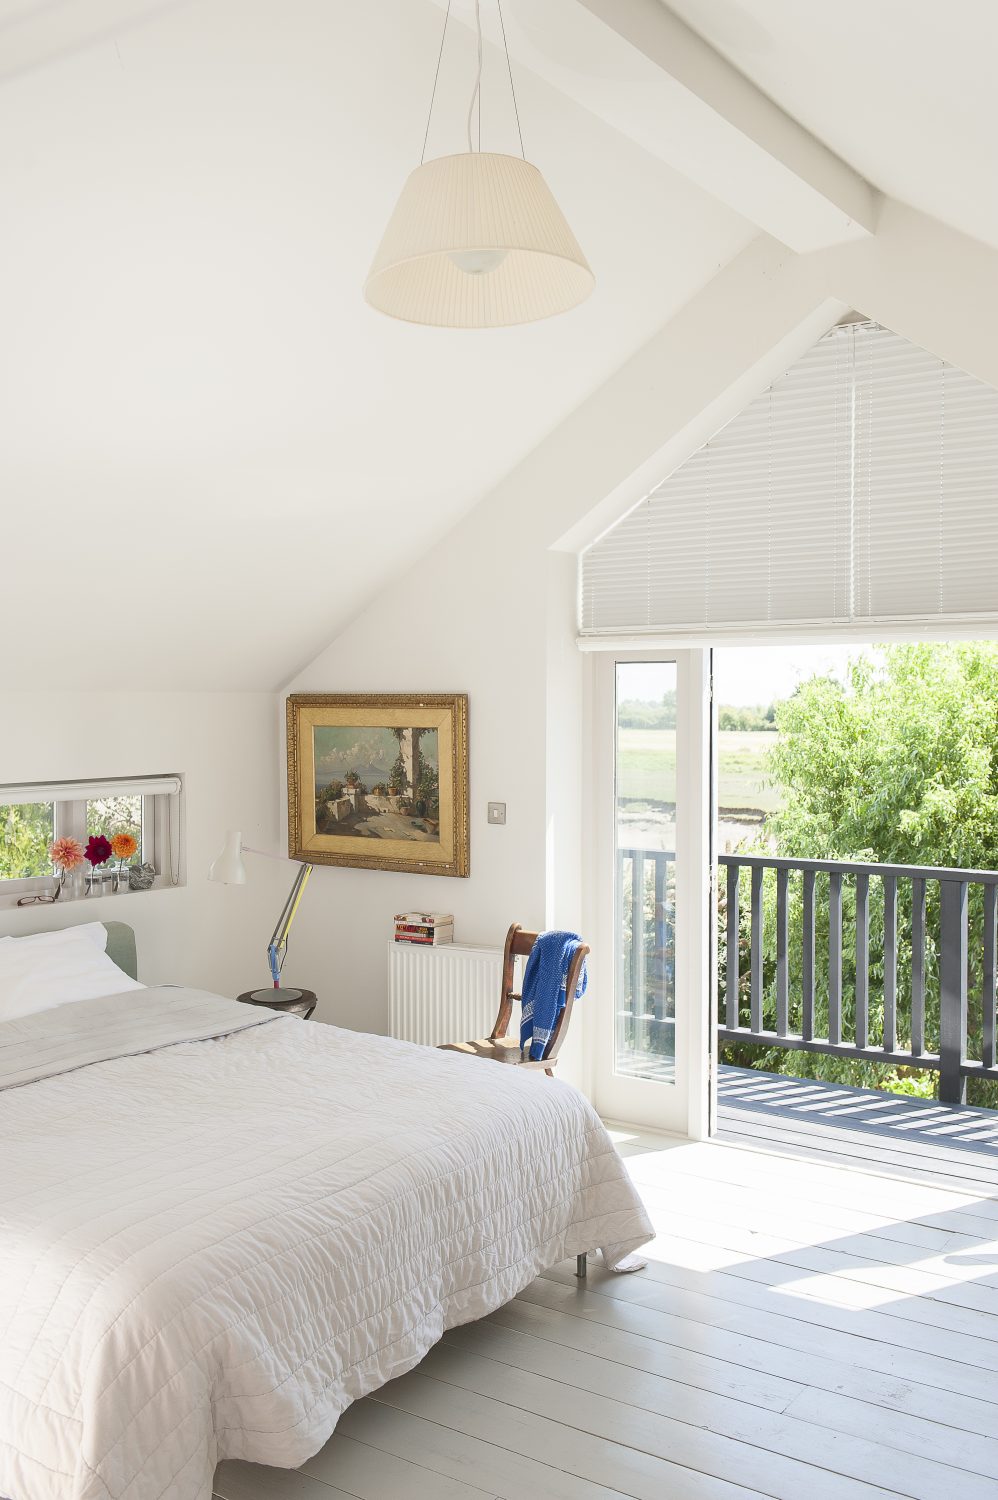 The lofty master bedroom features a balcony which looks out onto the river